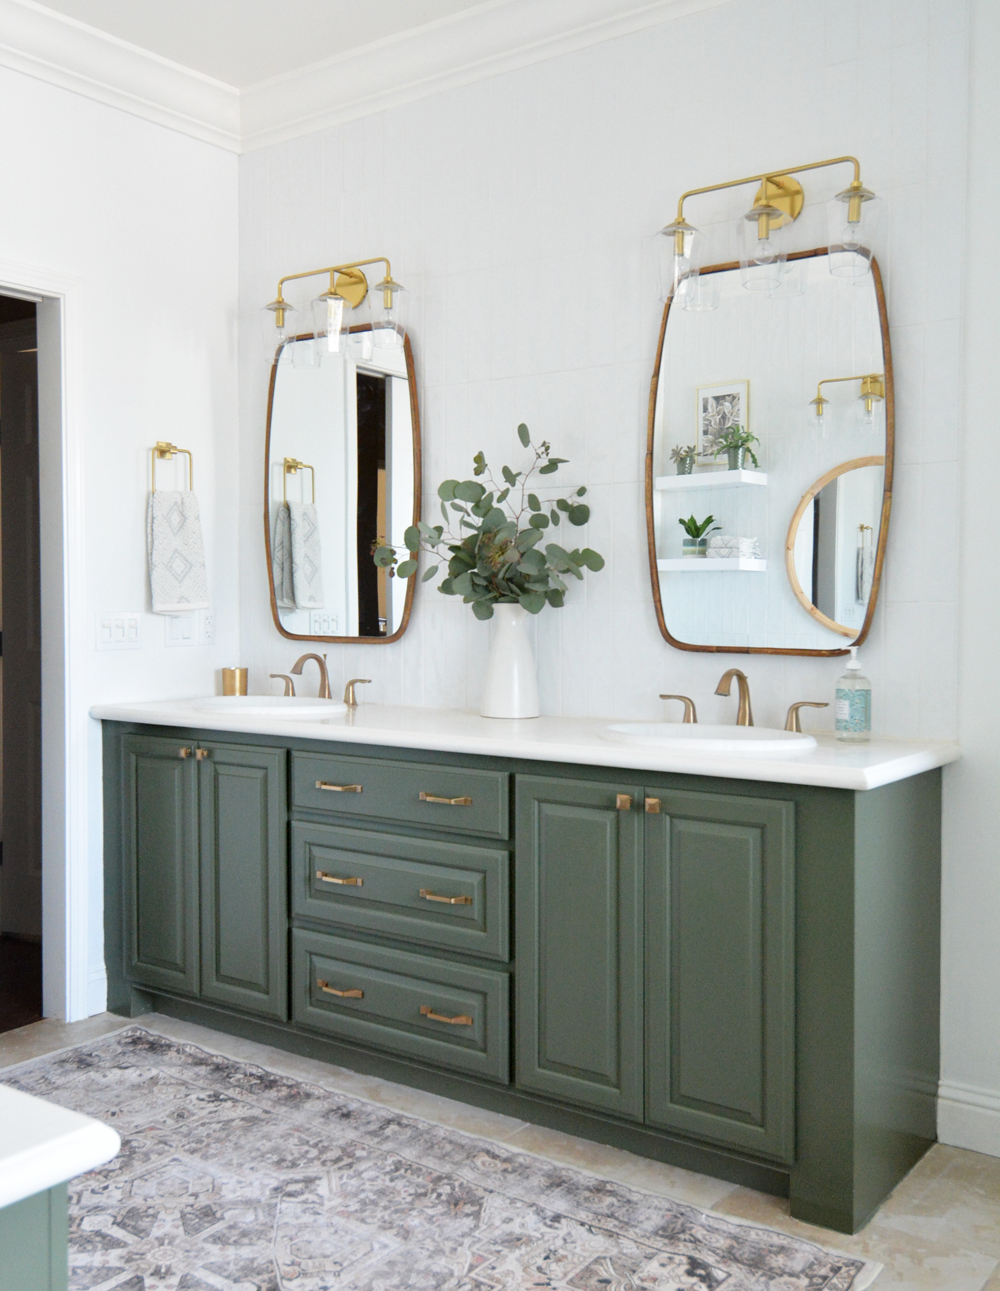 https://centsationalstyle.com/wp-content/uploads/2021/04/green-painted-bathroom-cabinets.jpg